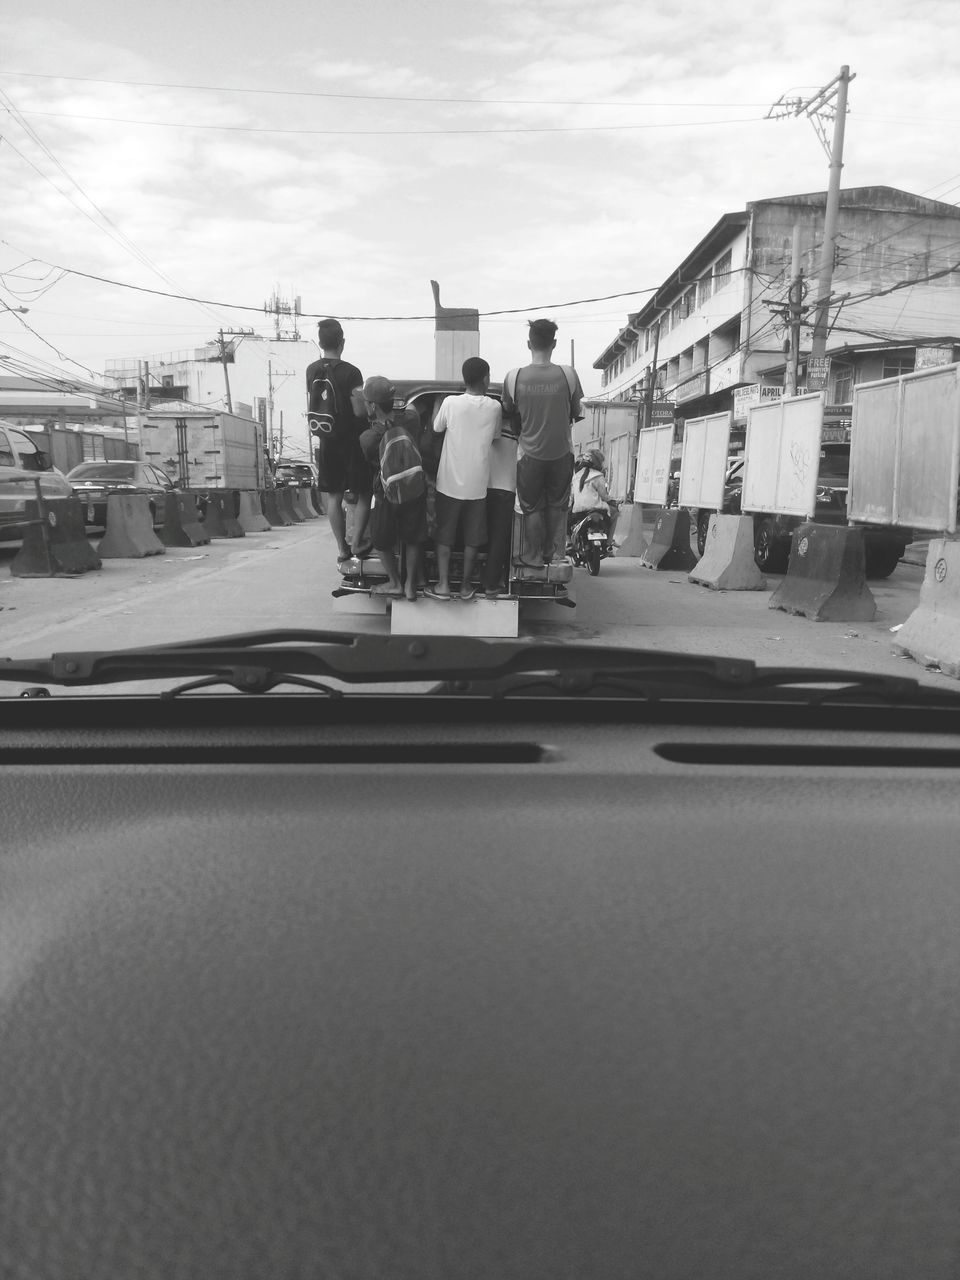 REAR VIEW OF MEN ON ROAD IN CITY